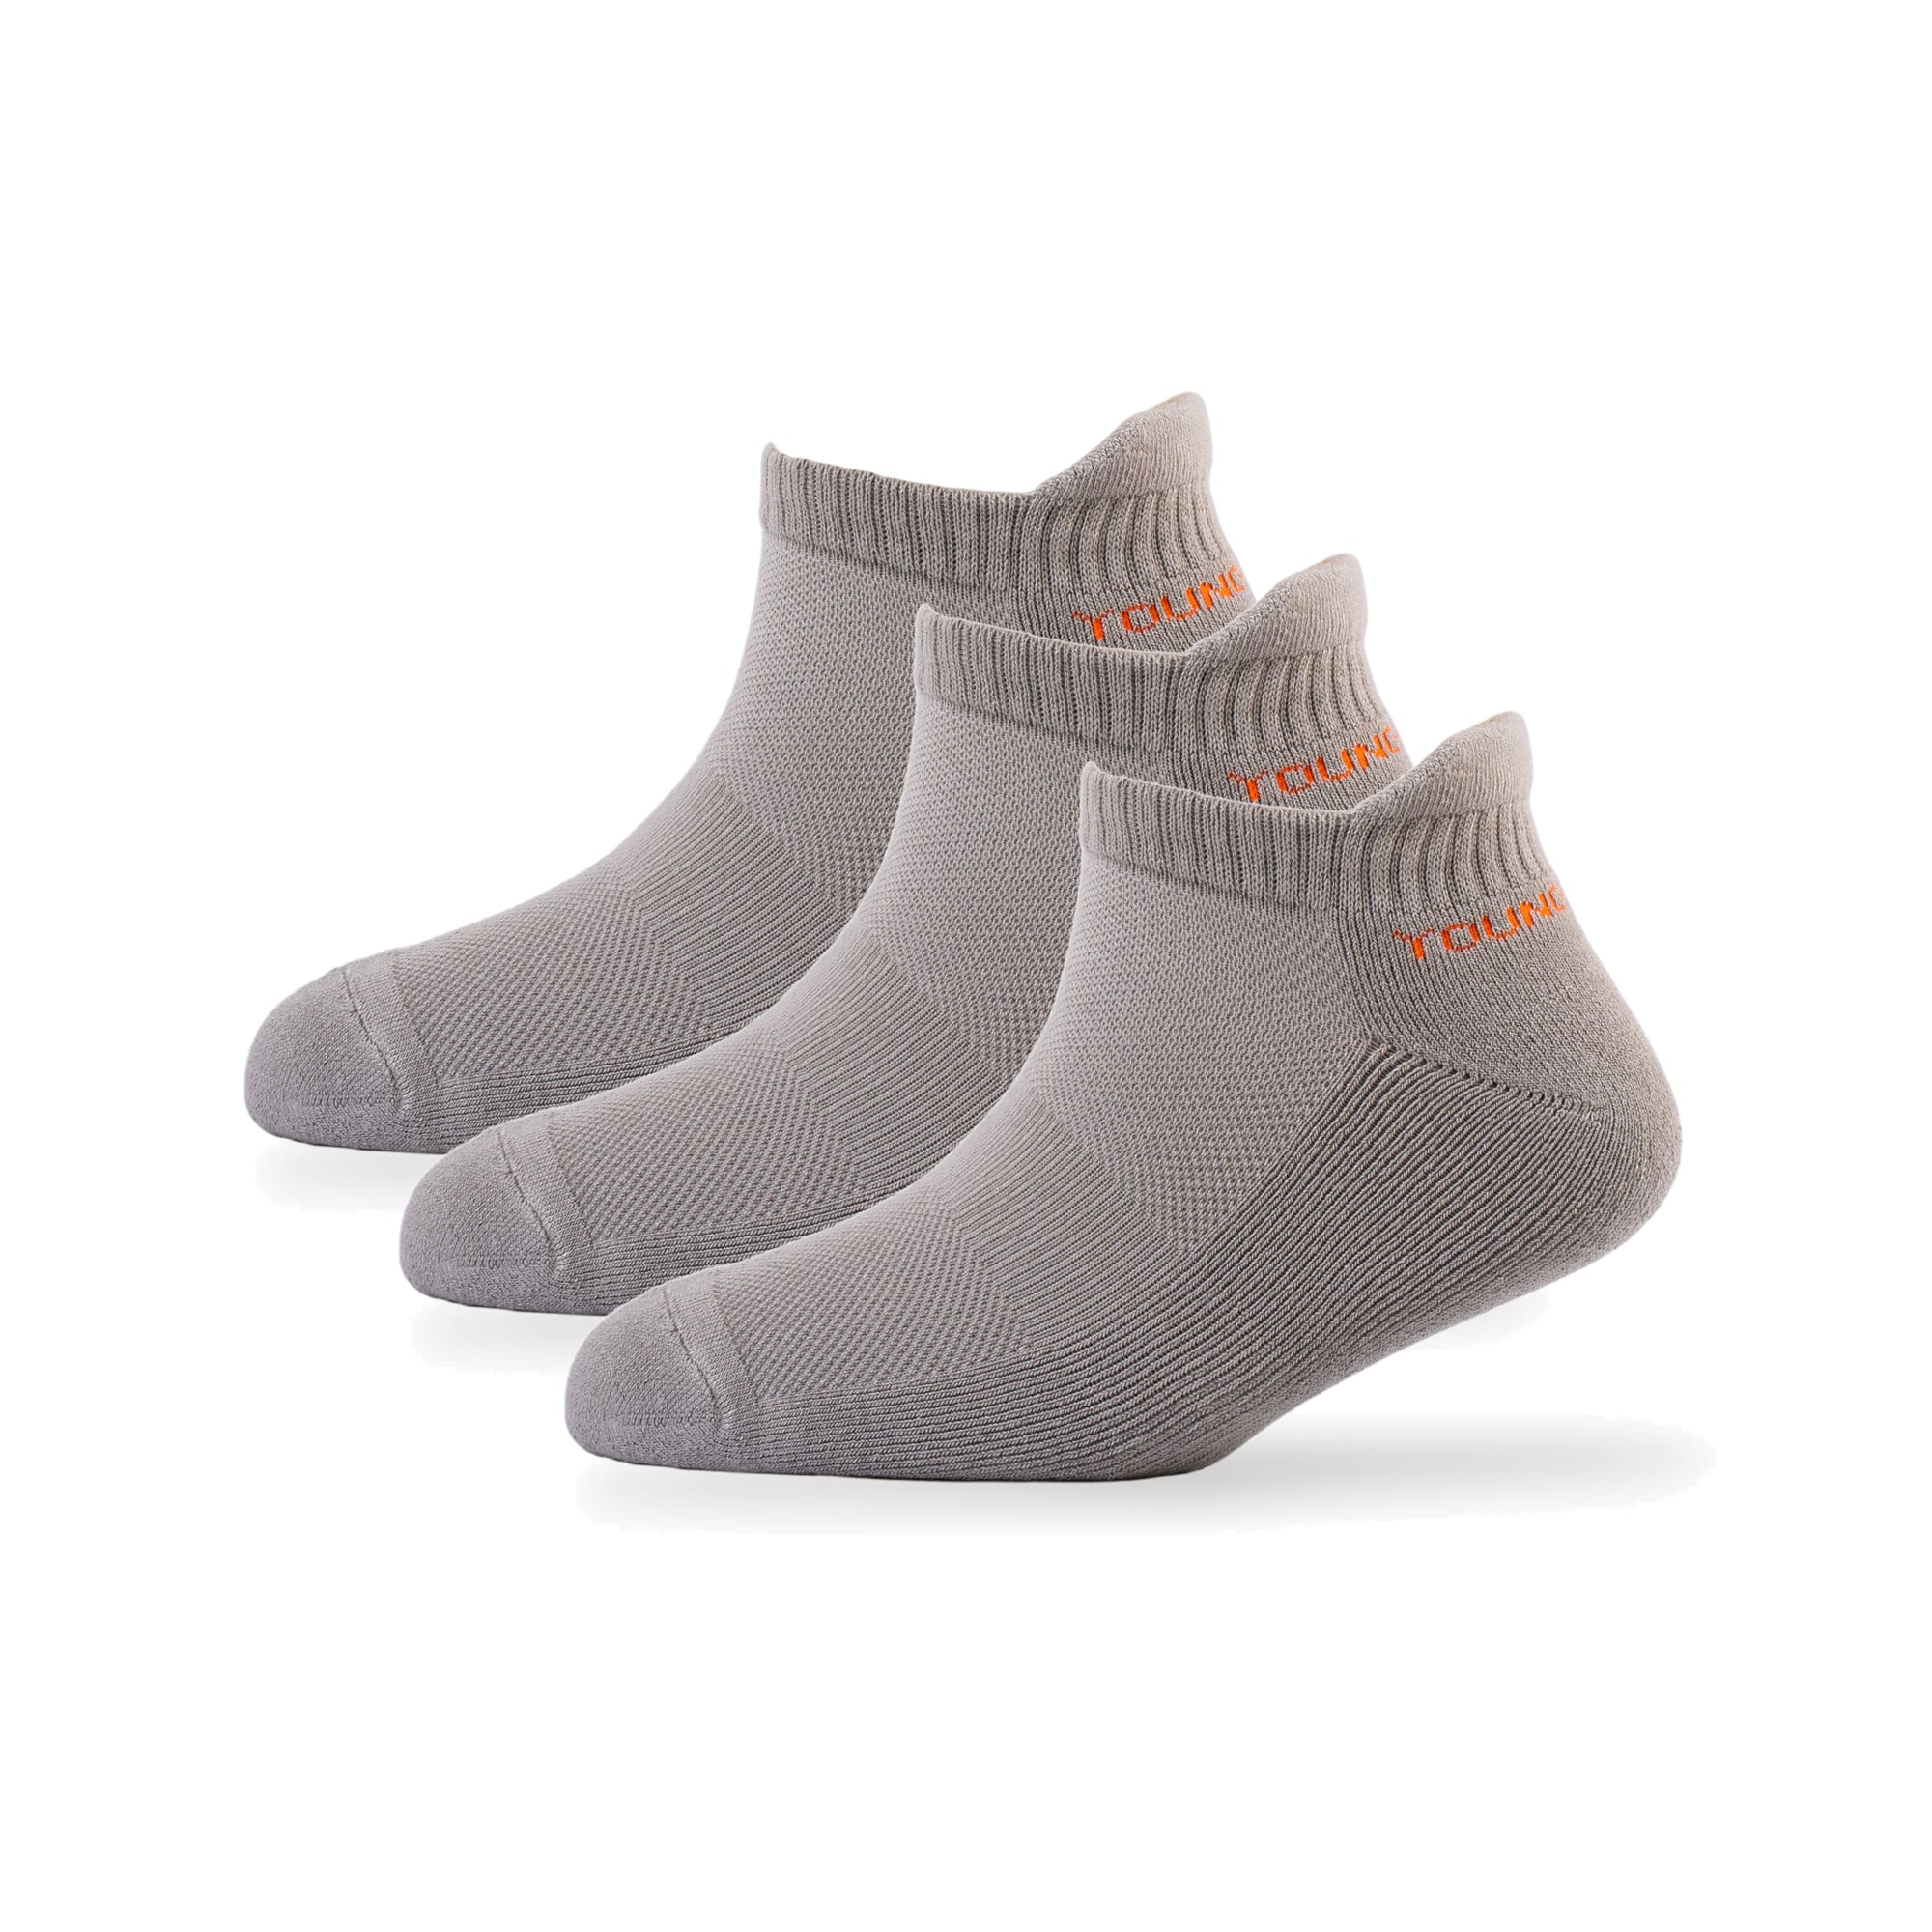 Young Wings Bamboo Fabric Solid Design Ankle Length Sports Socks - Pack of 3, Style no.2613-M3